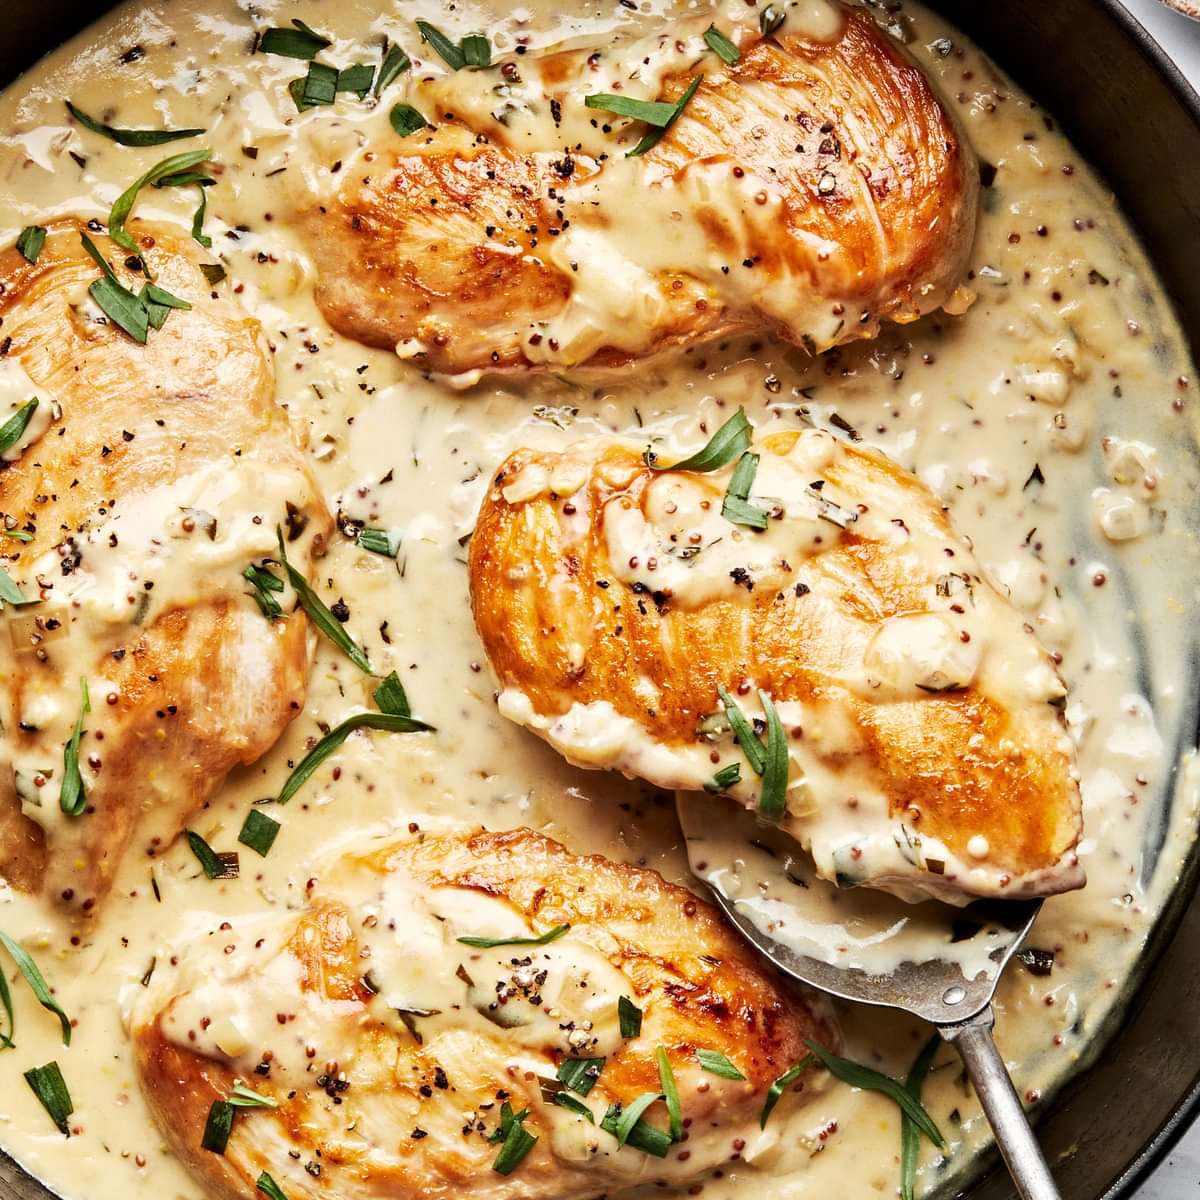 dijon chicken in a skillet made with cream, wine, dijon and sprinkled with pepper and fresh tarragon